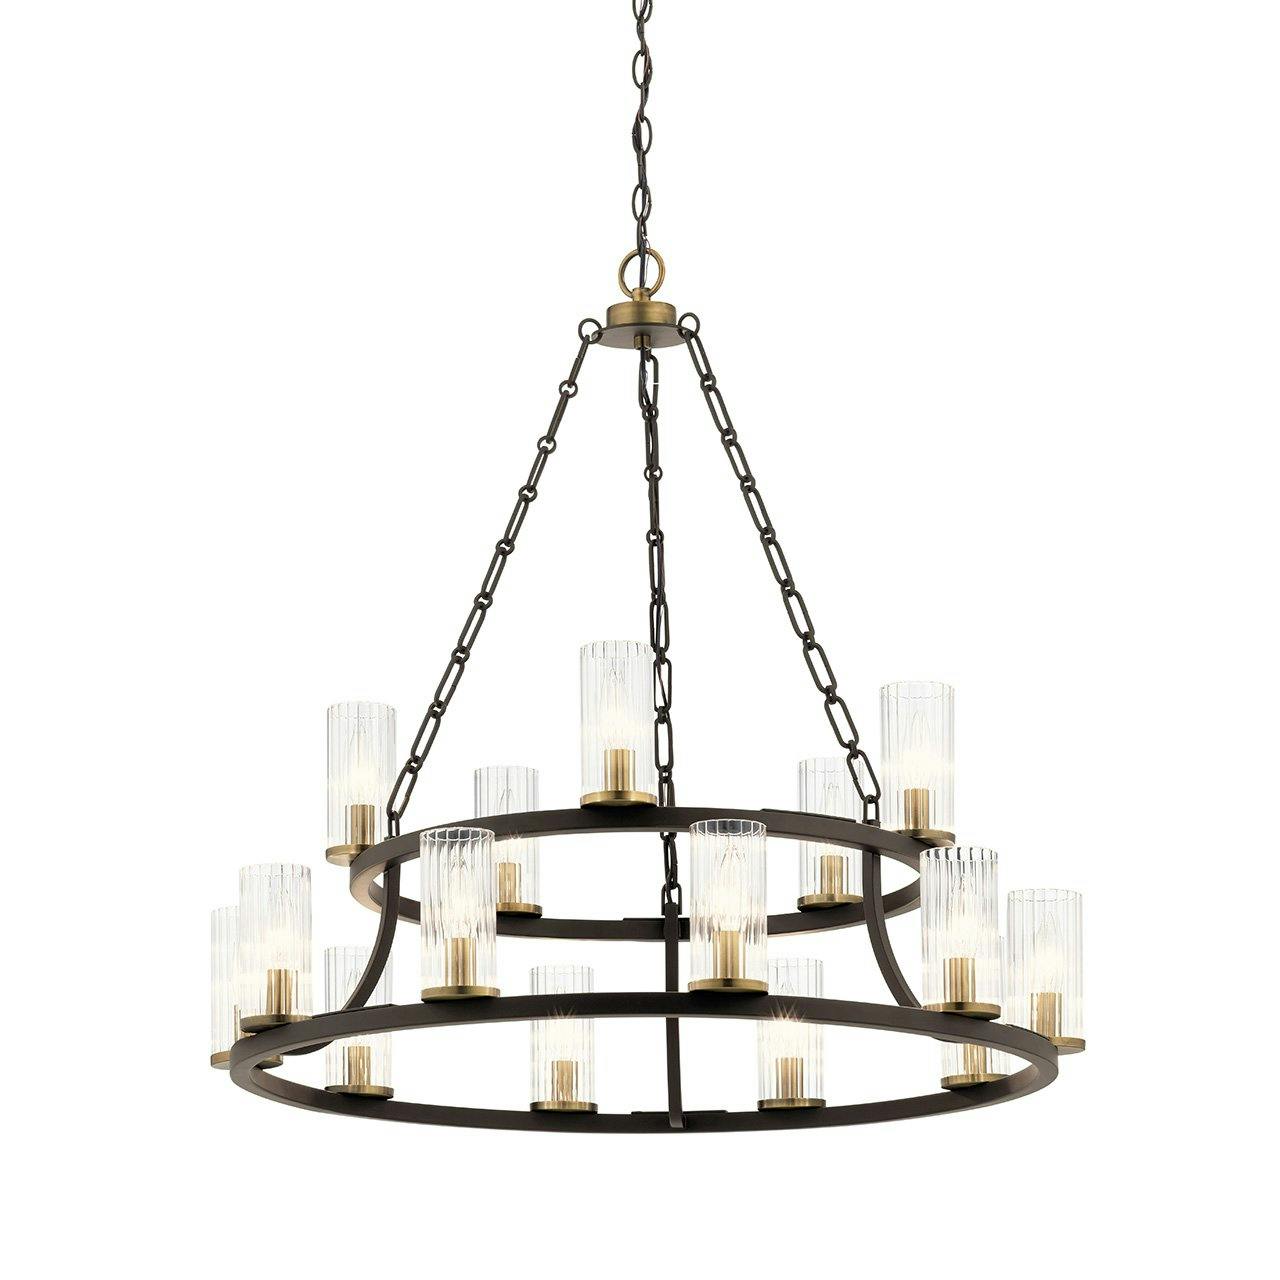 Mathias 15 Light 2 Tier Chandelier Bronze without the canopy on a white background